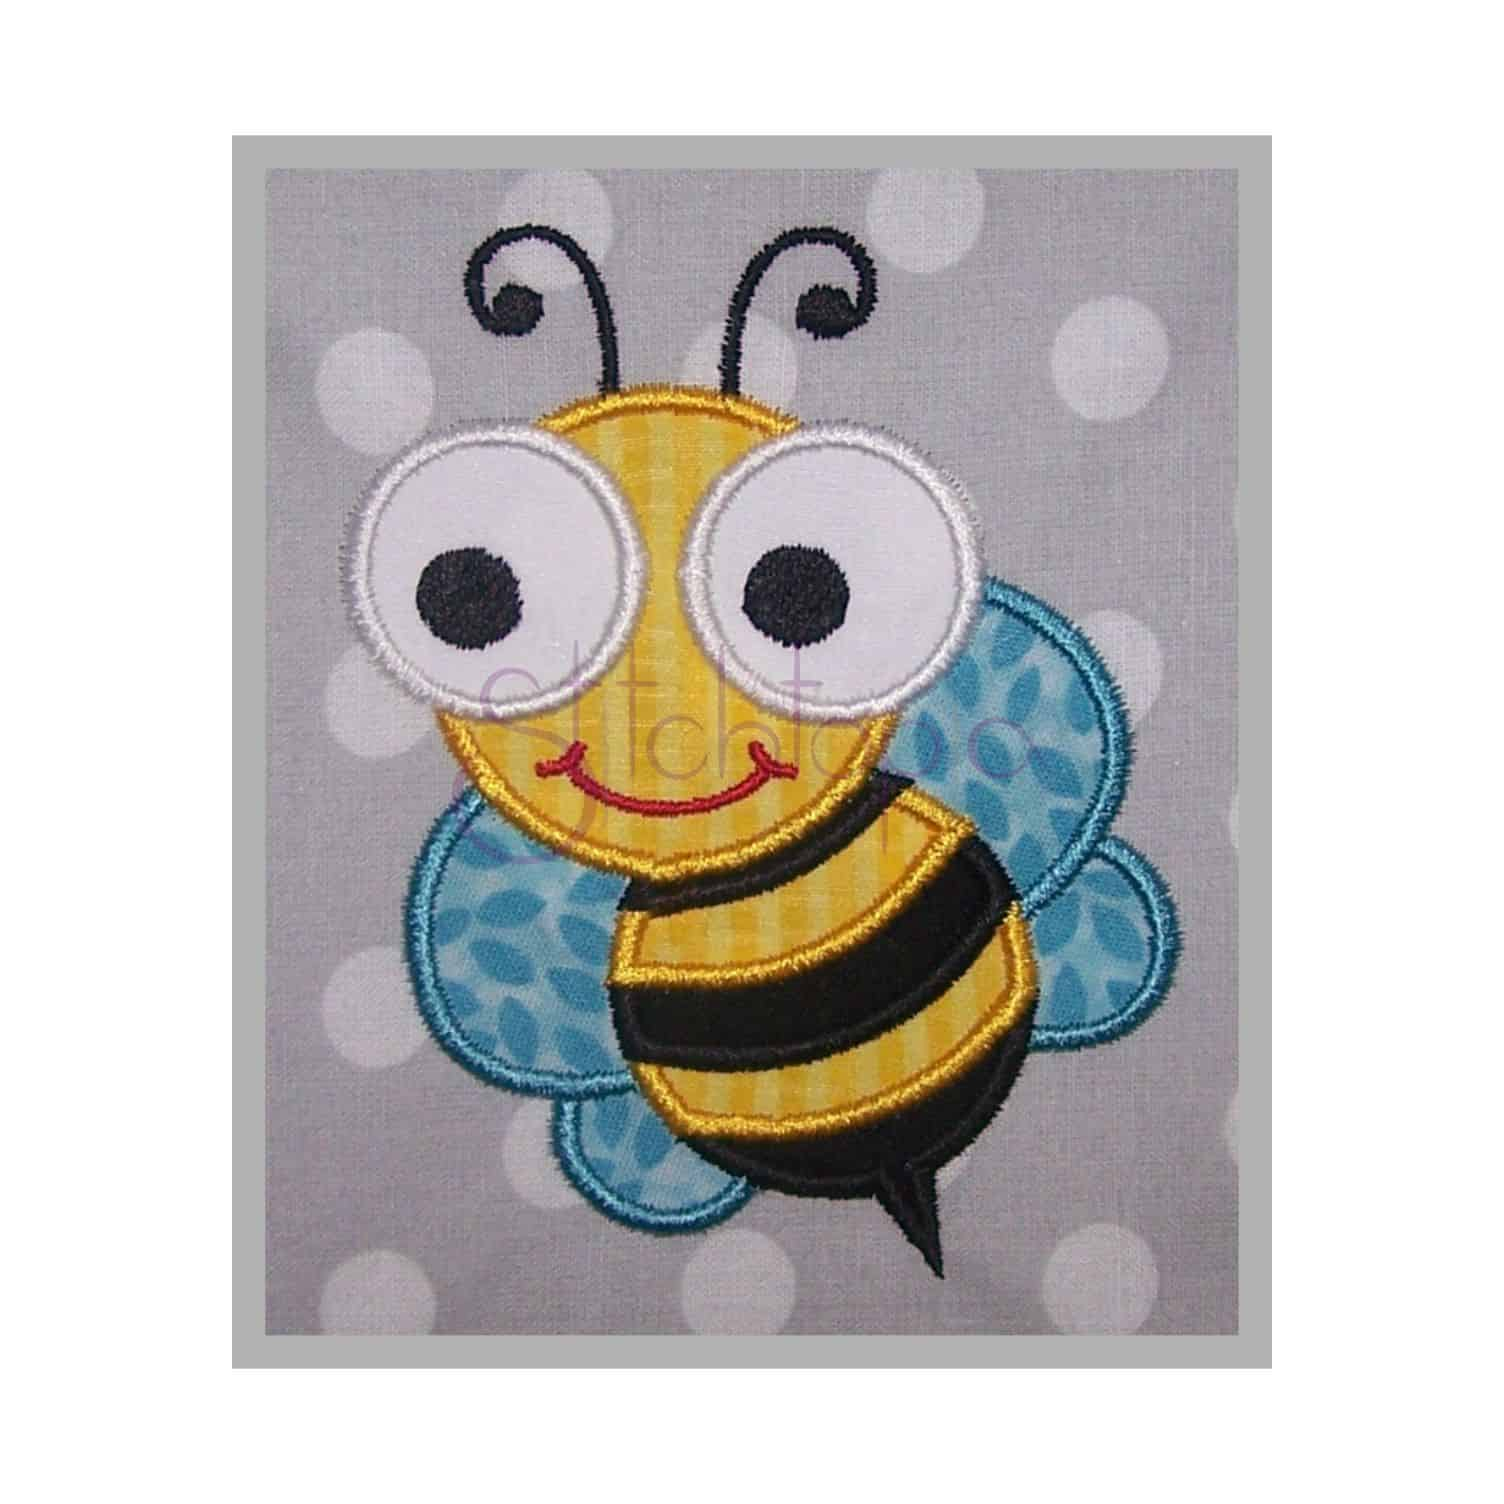 Bumble Bee Embroidery Pattern Cute Bugs Bee Applique Design